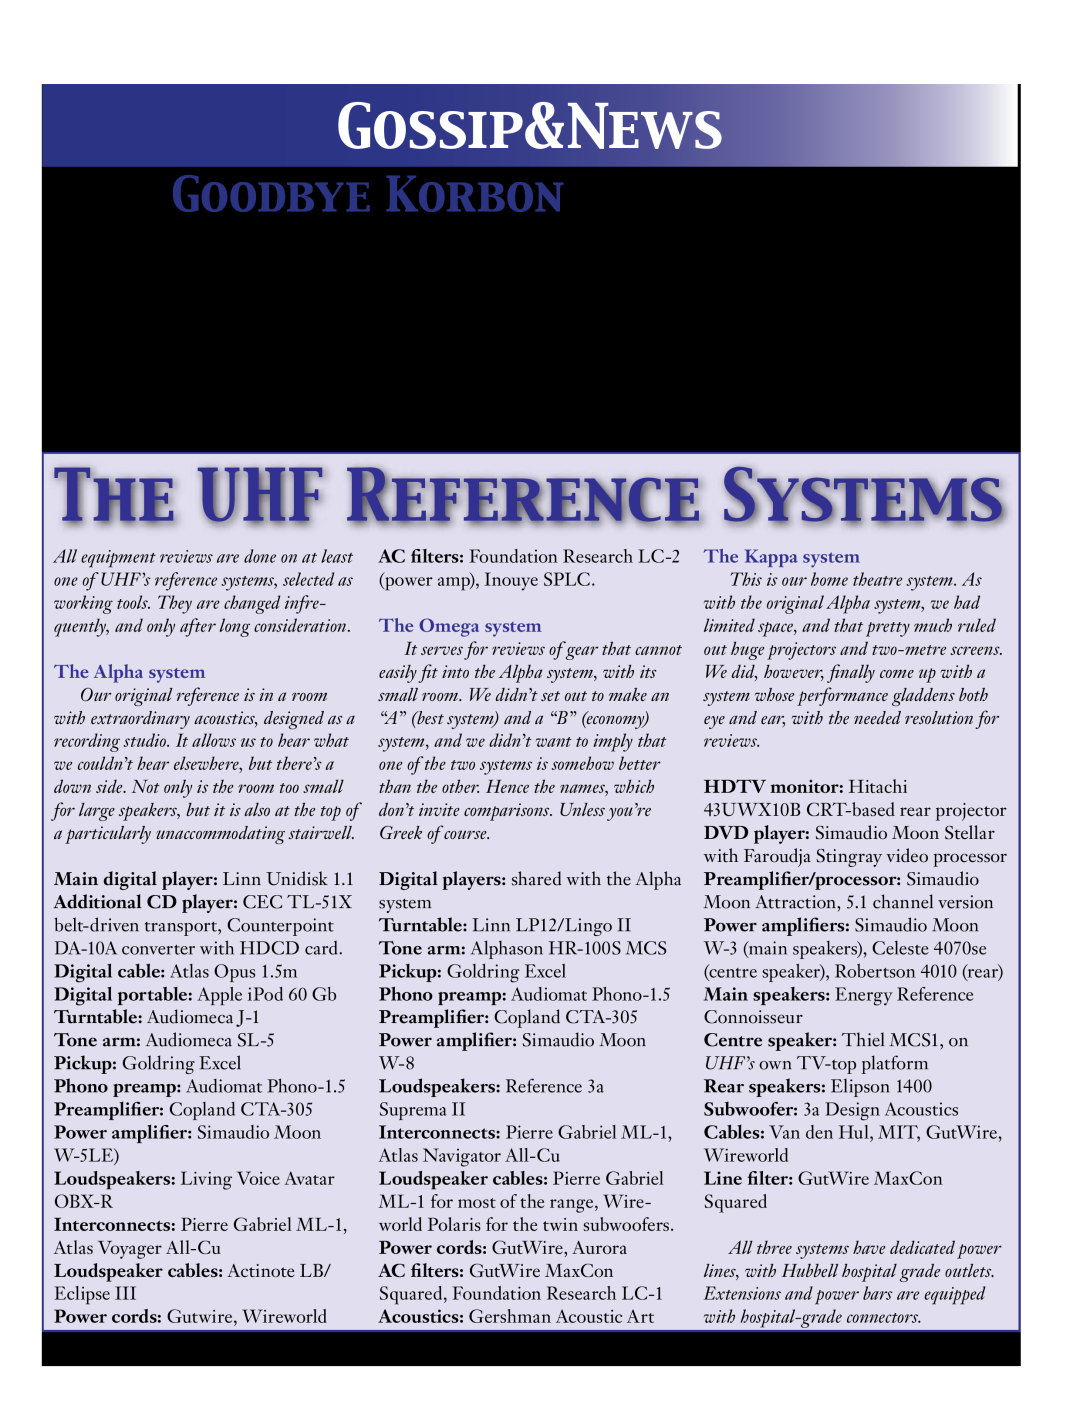 Koss 76 Gossip&News, The Uhf Reference Systems, Goodbye Korbon, All equipment reviews are done on at least, system, W-5LE 